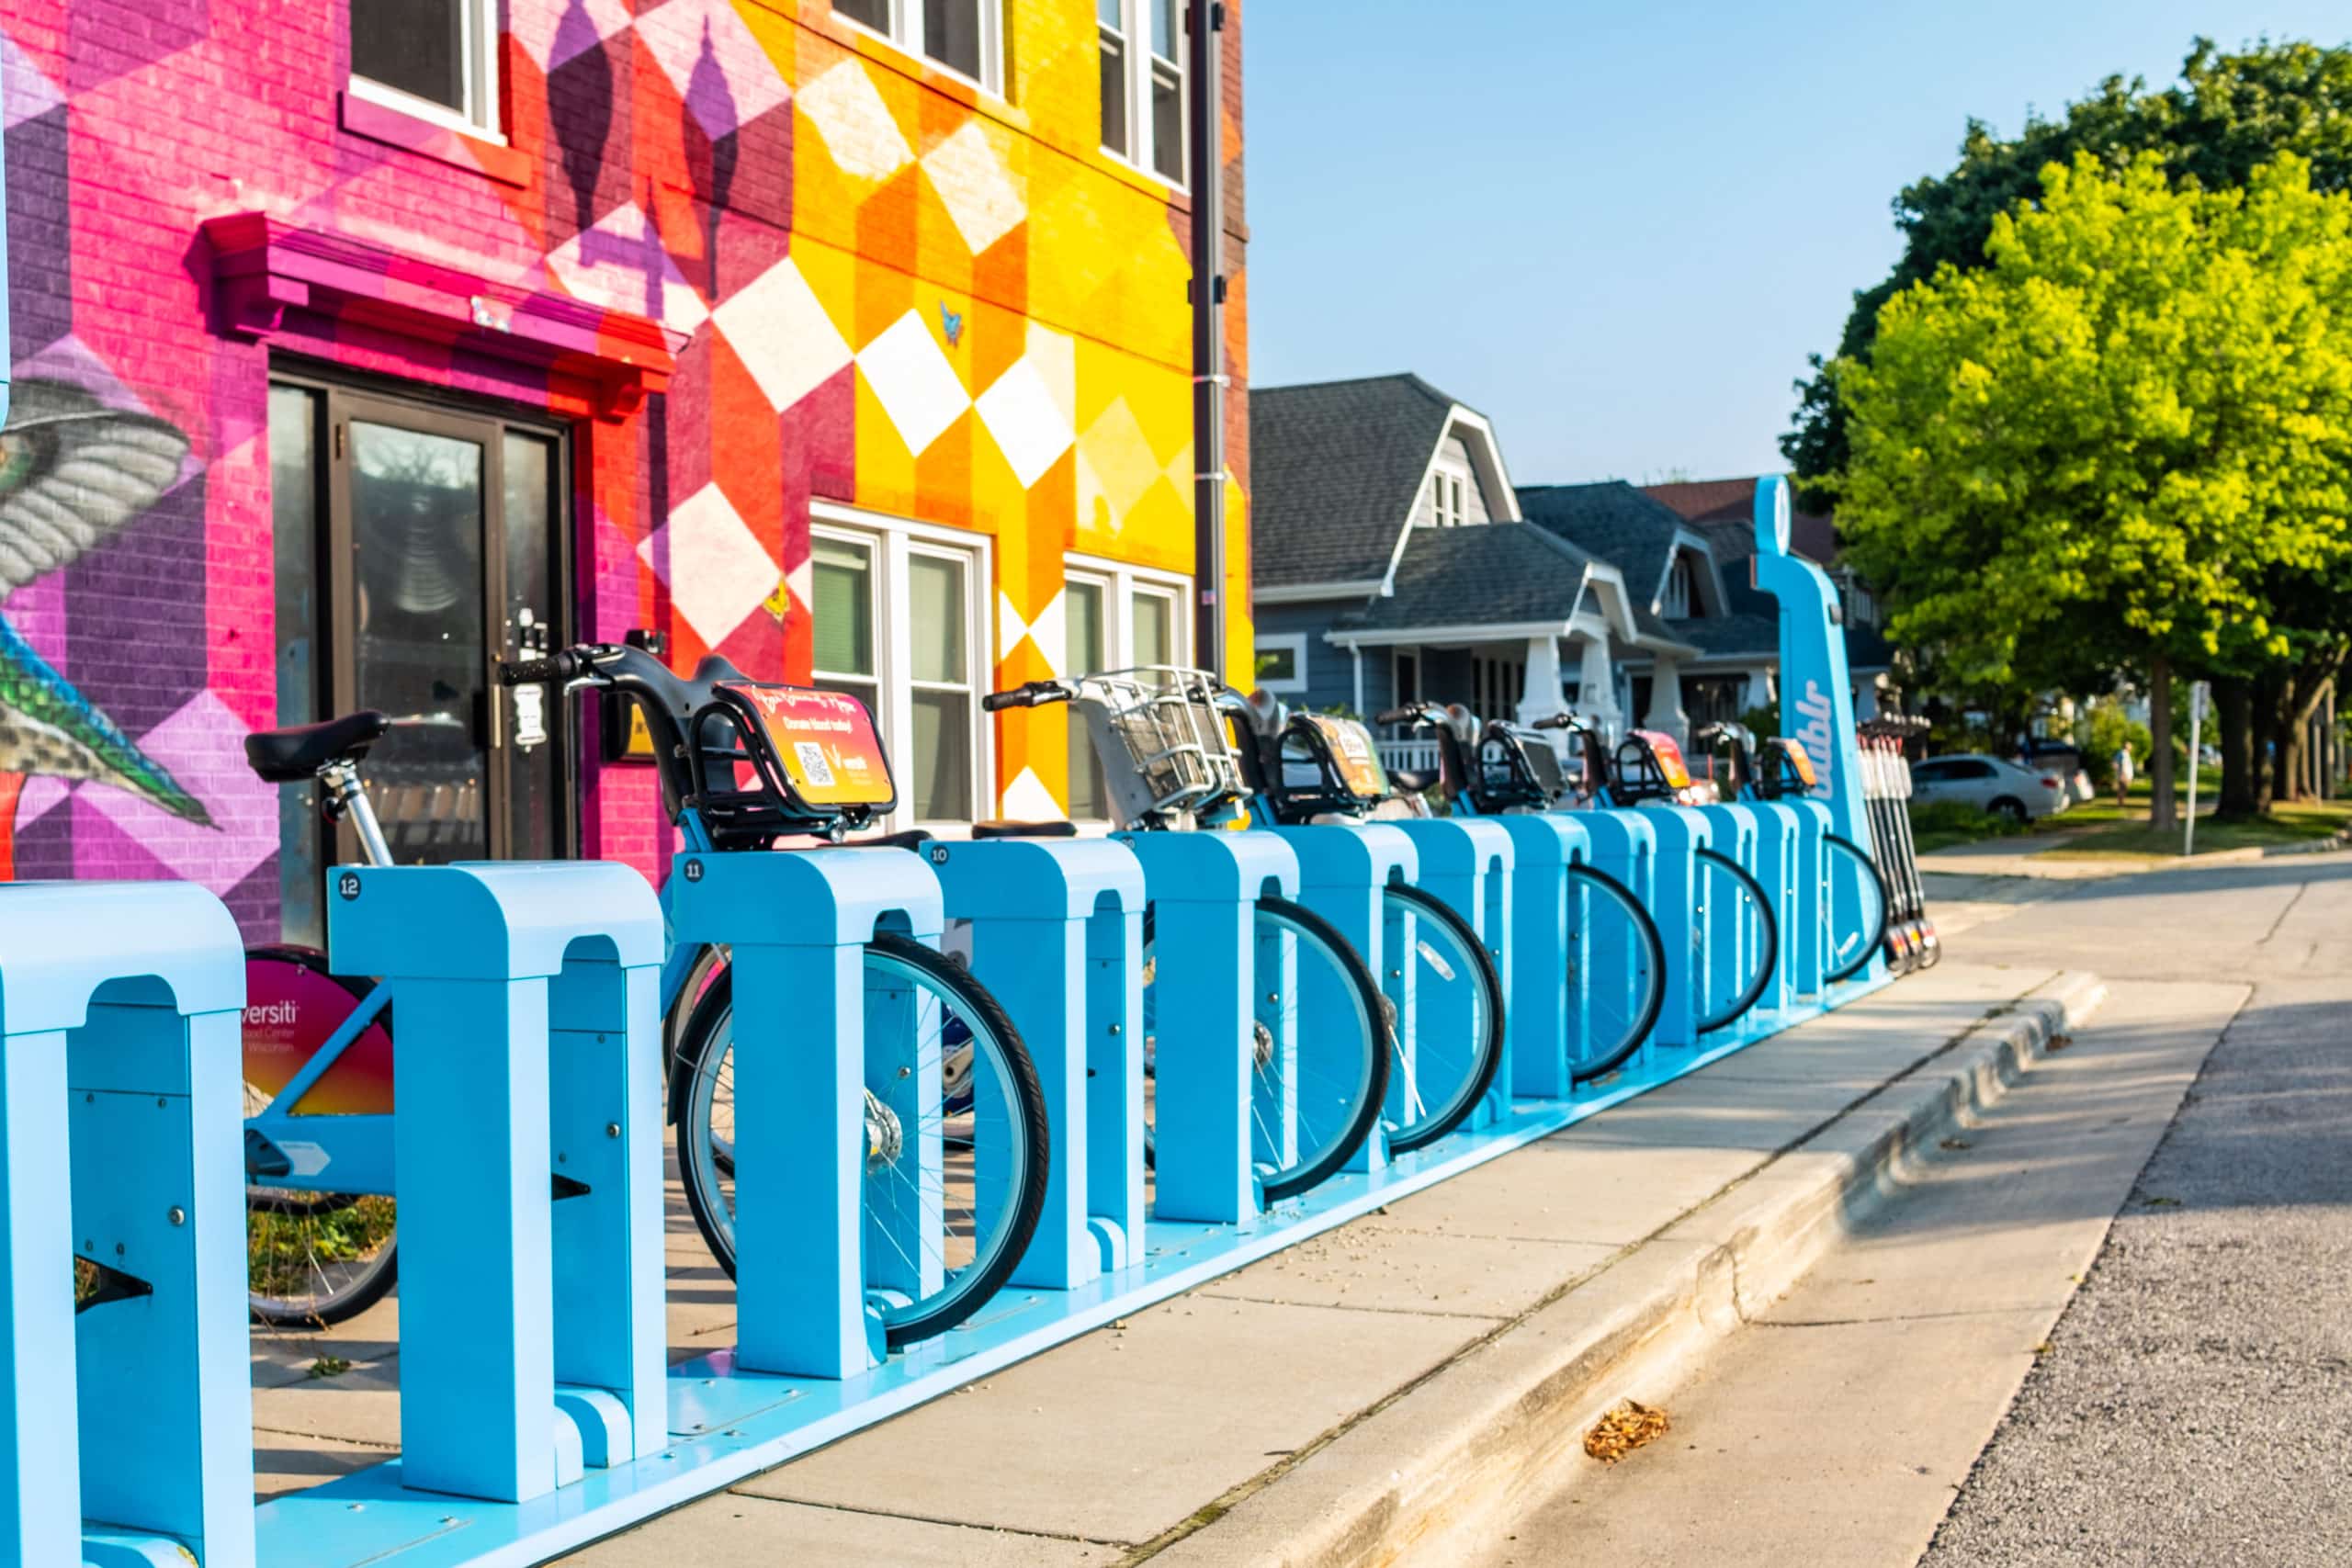 Colorful mural background with Bublr Bikes at their station.